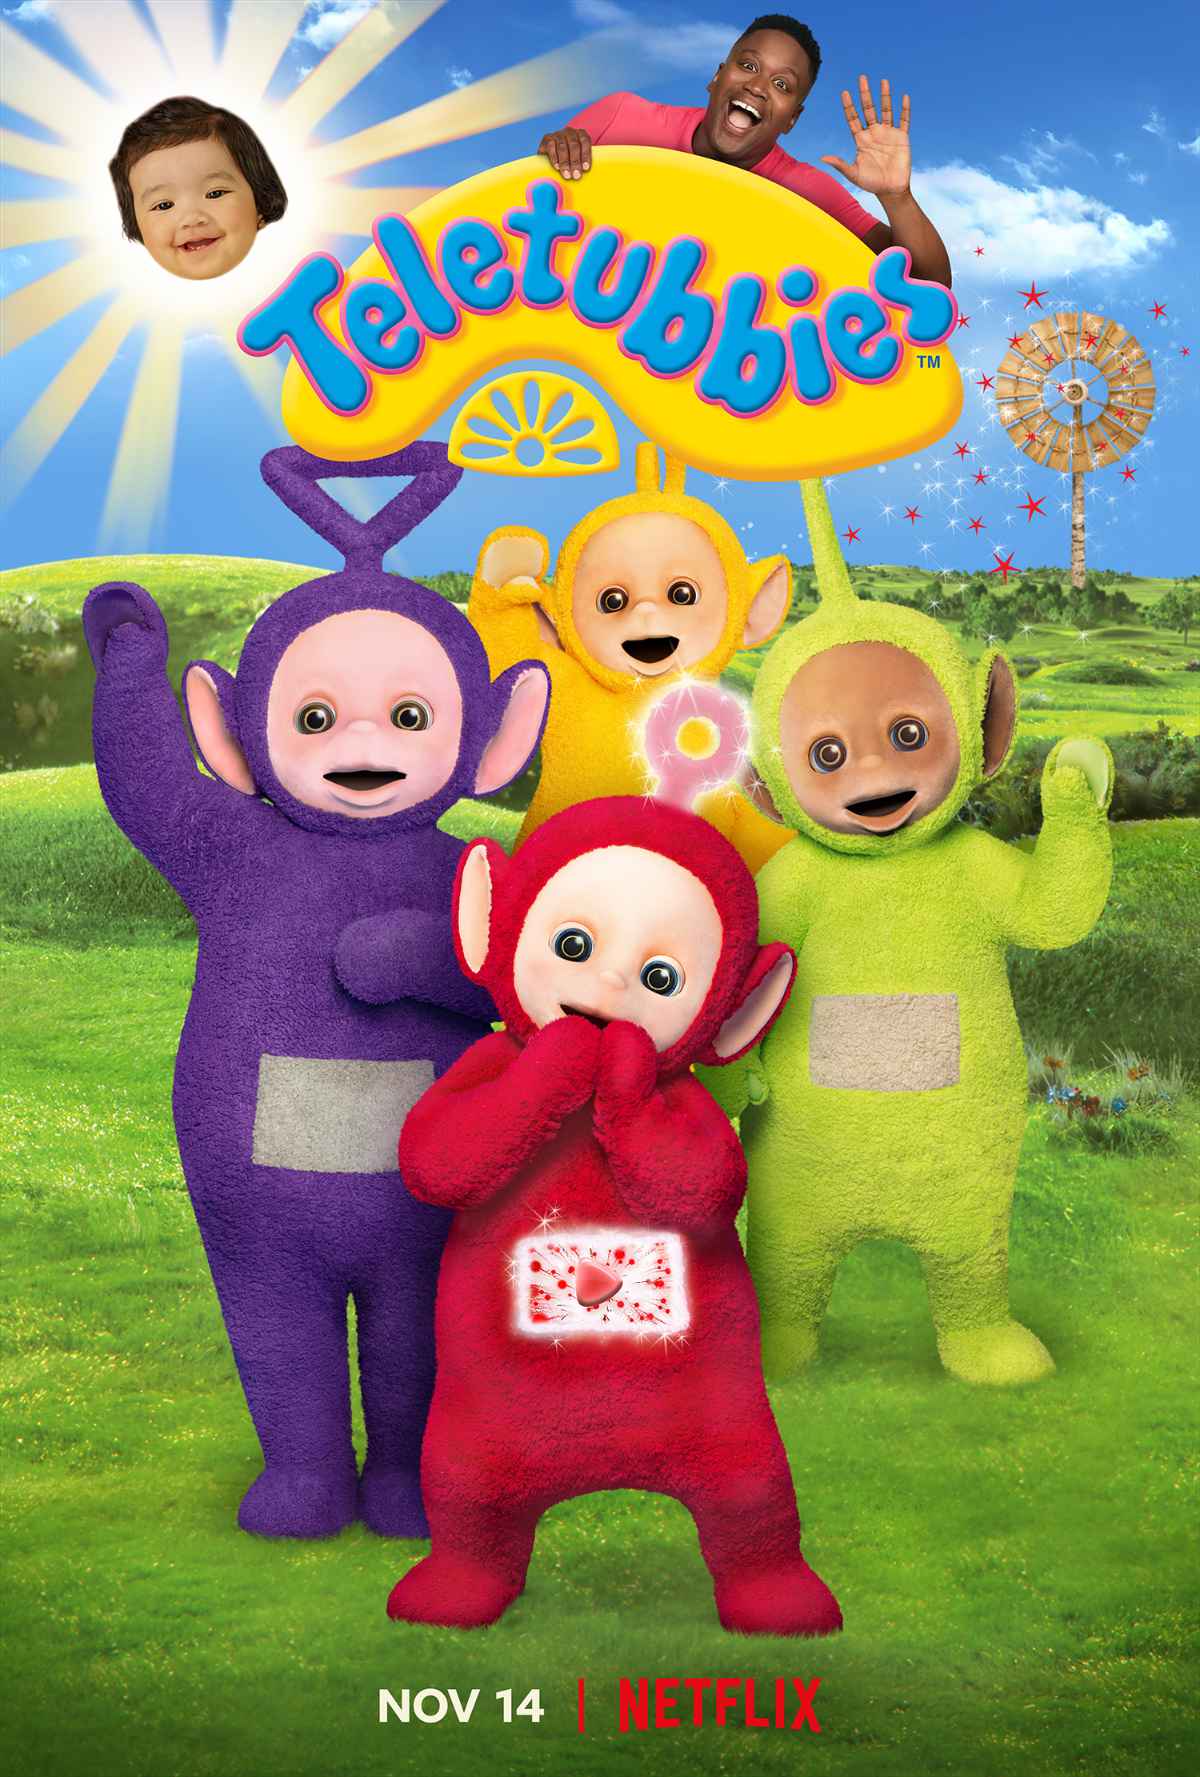 Teletubbies and Princess Power